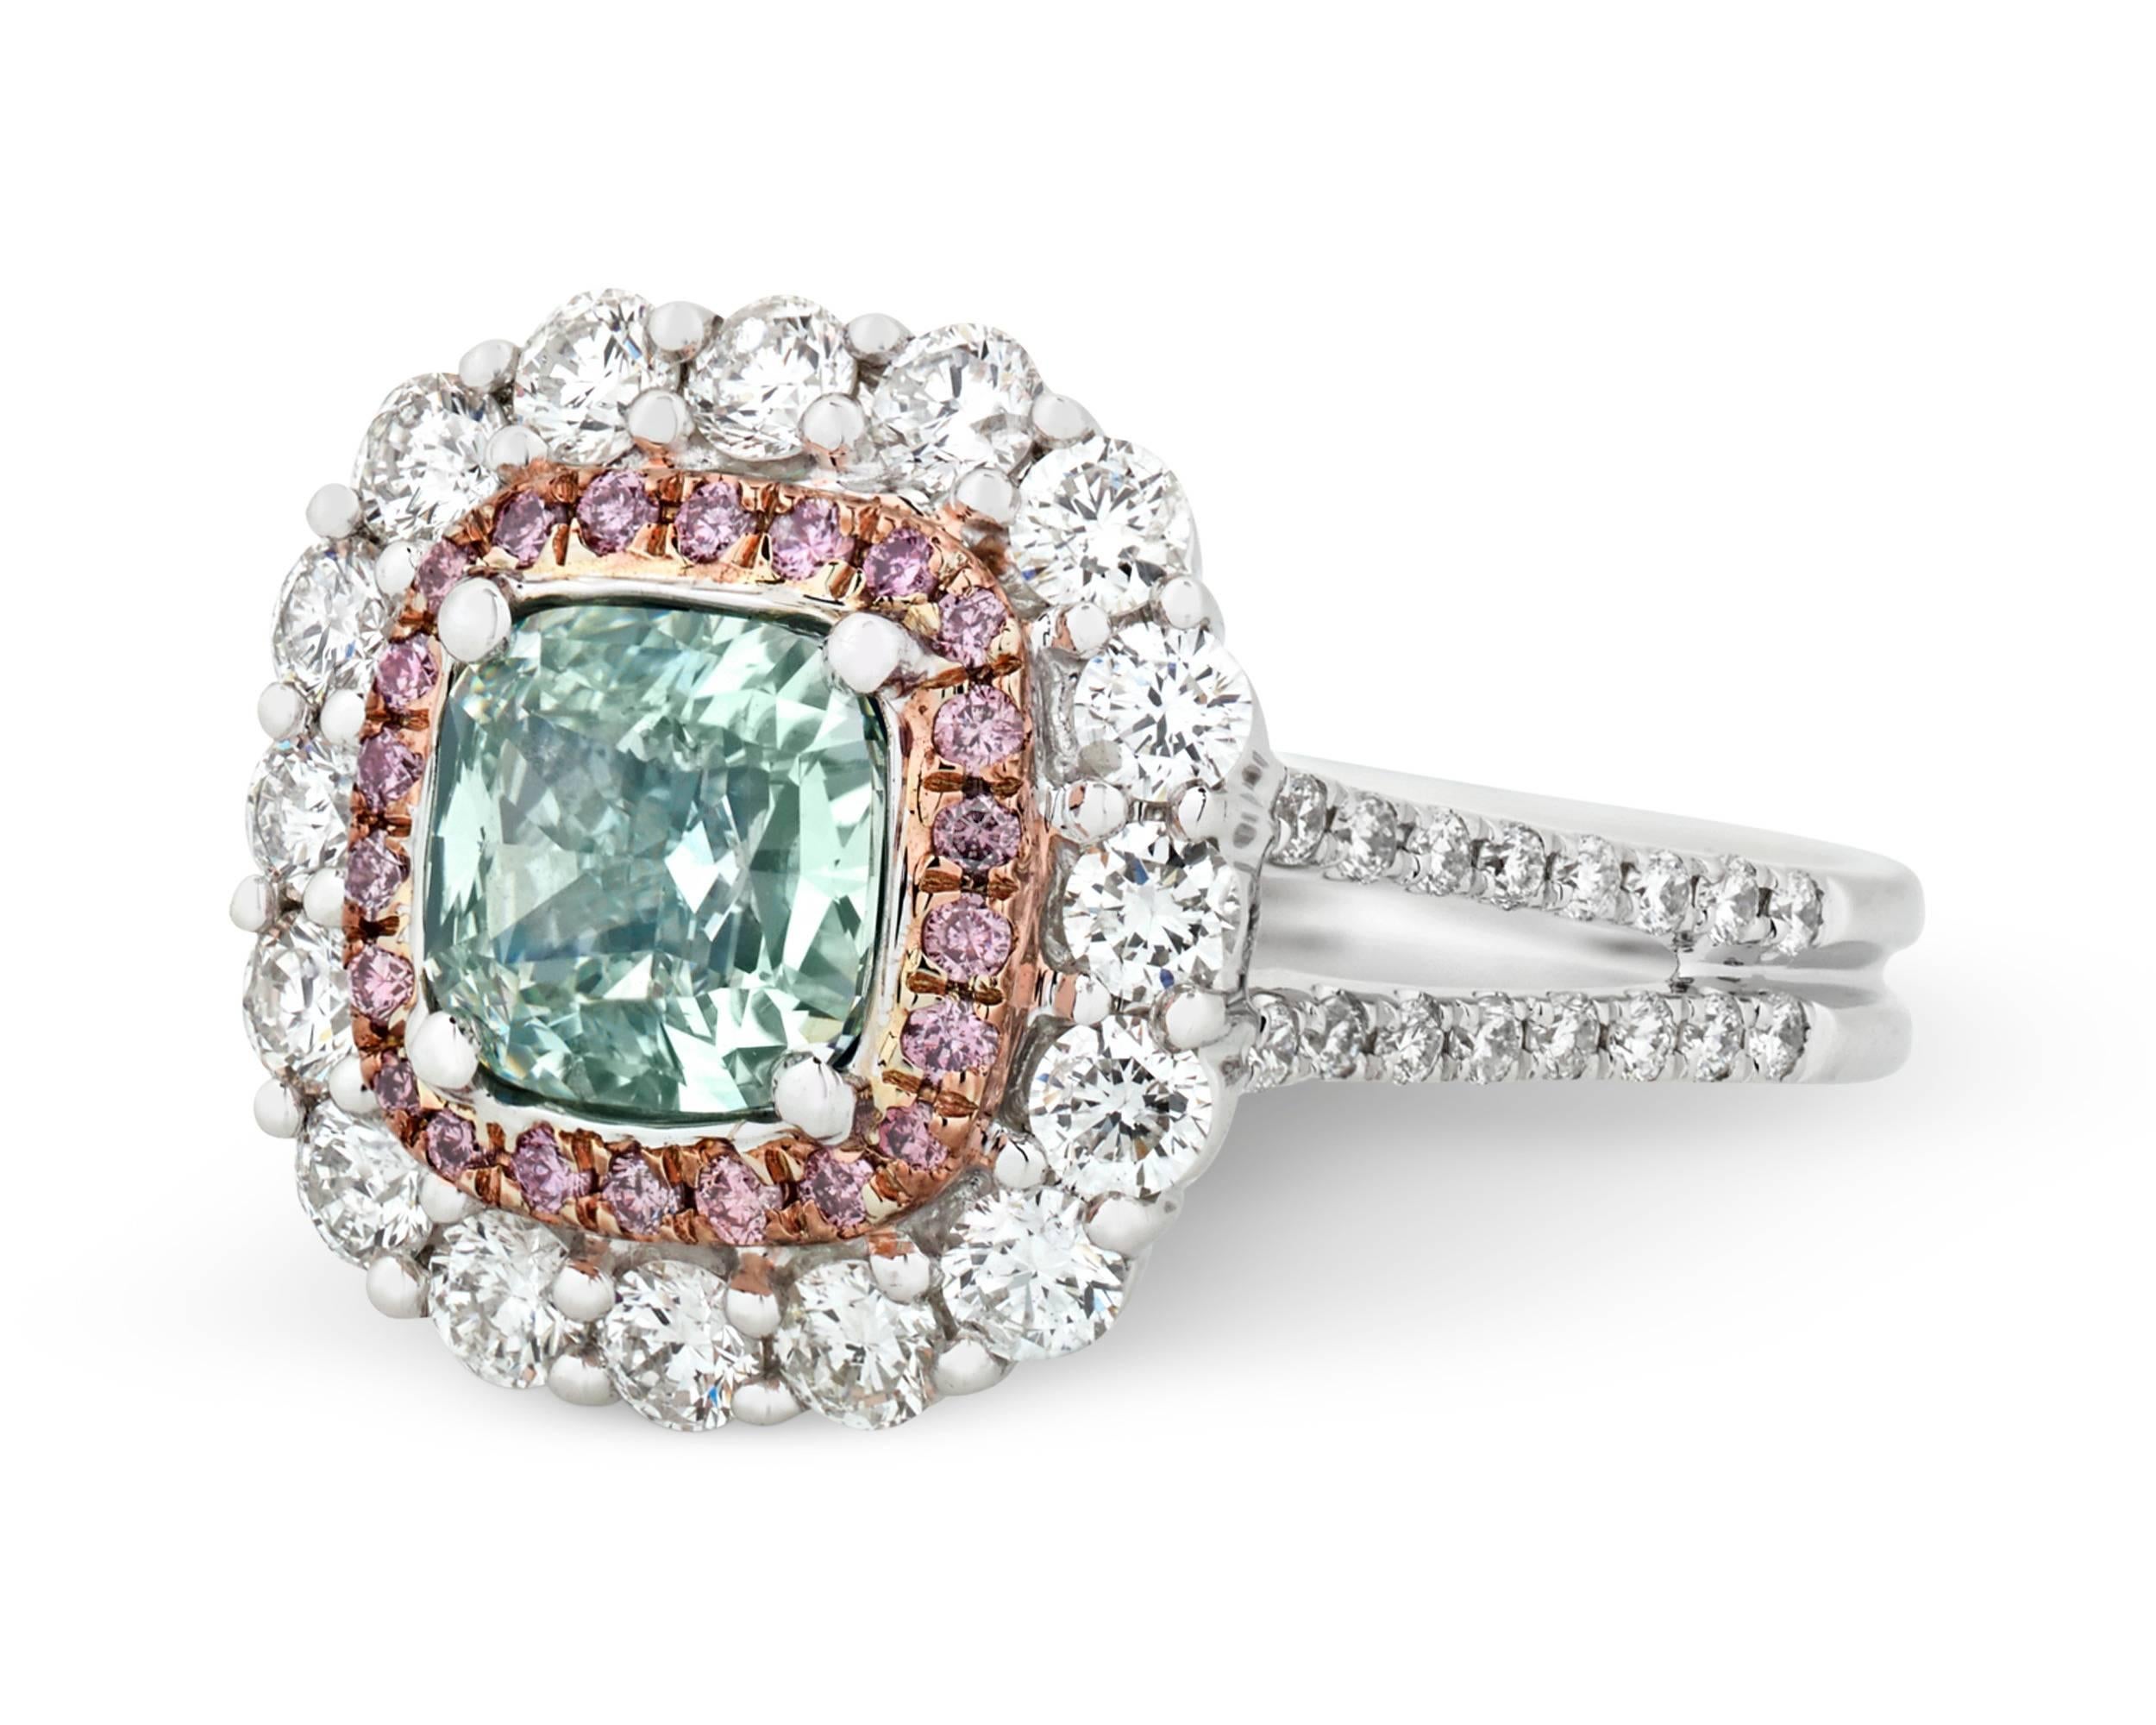 An immense rarity in the world of Fancy colored diamonds, this awe-inspiring 1.23-carat Fancy Light bluish-green diamond is one of the handfuls of green diamonds to have come on the market in the past half century. Certified by the Gemological